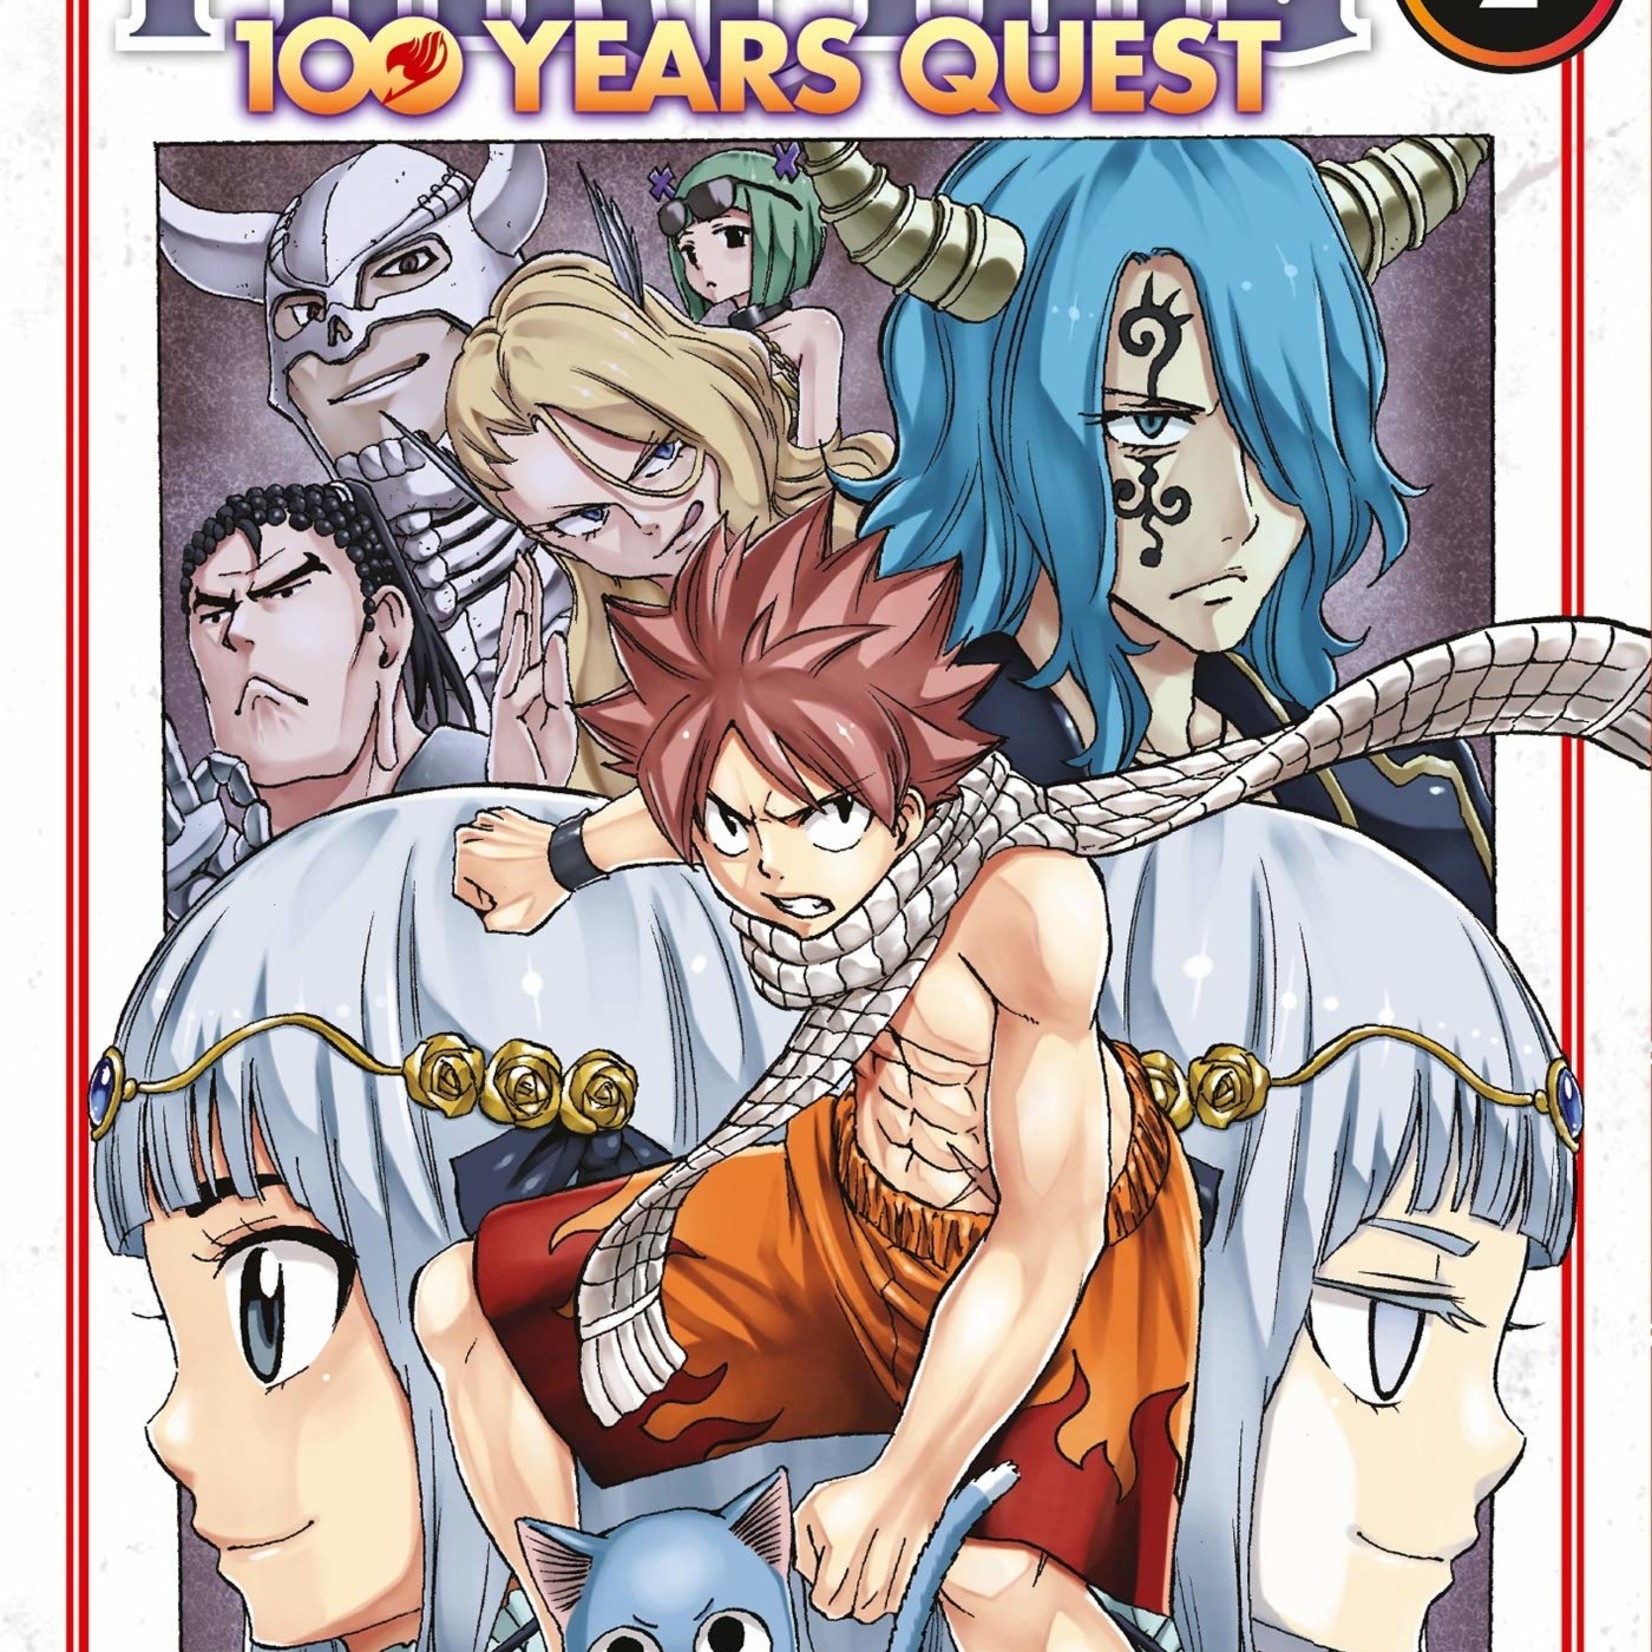 Pika Edition Manga - Fairy Tail 100 Years Quest Tome 02